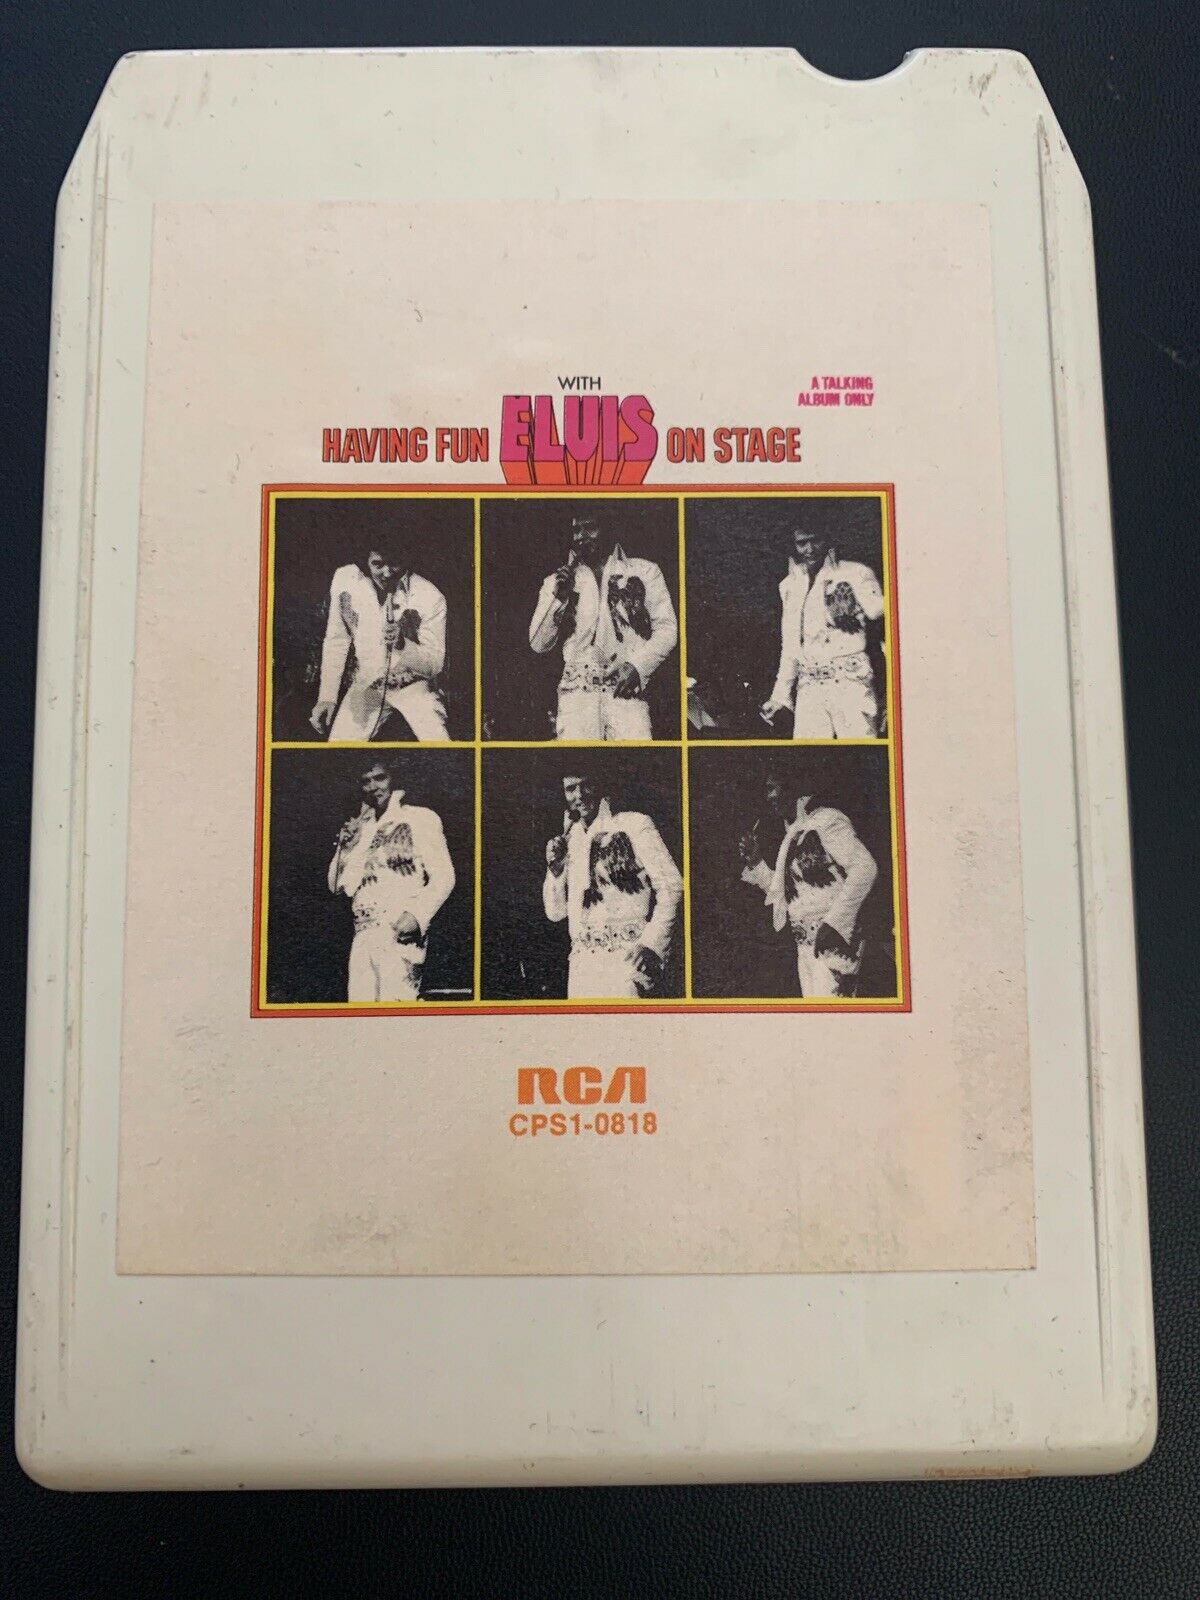 Talking Album Having Fun With Elvis On Stage 8 Track / Rca / Direct From Memphis